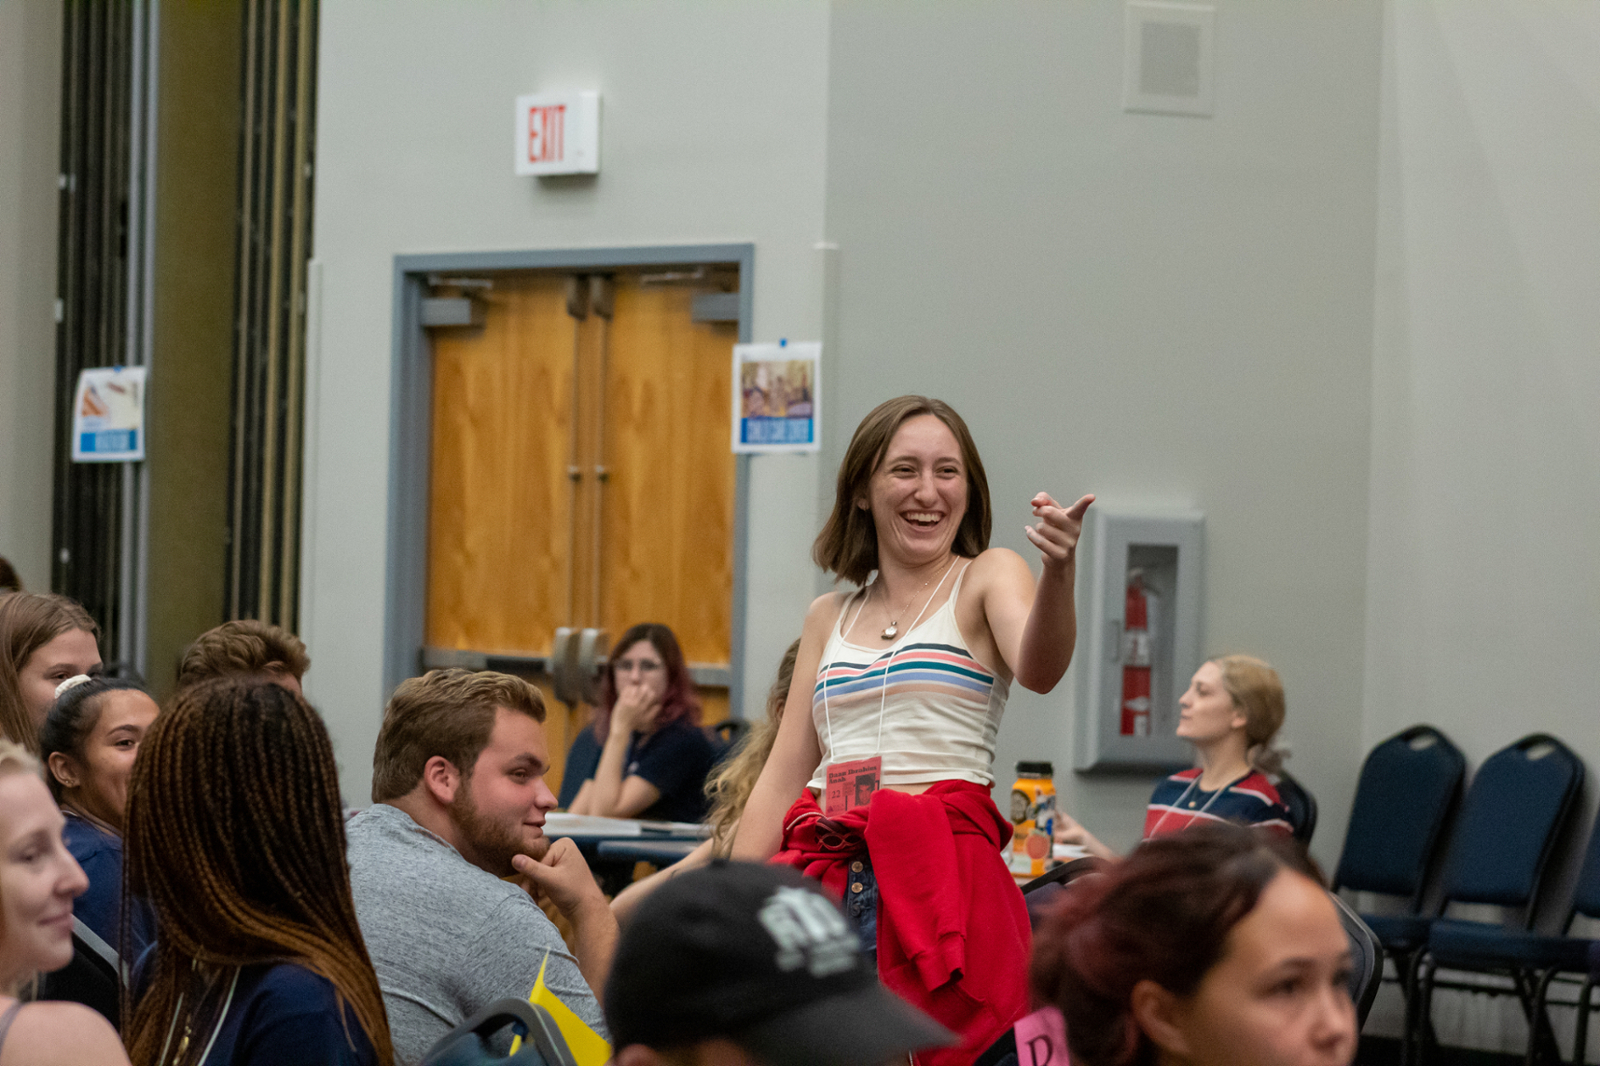 Student smiling and pointing during Refugee Simulation